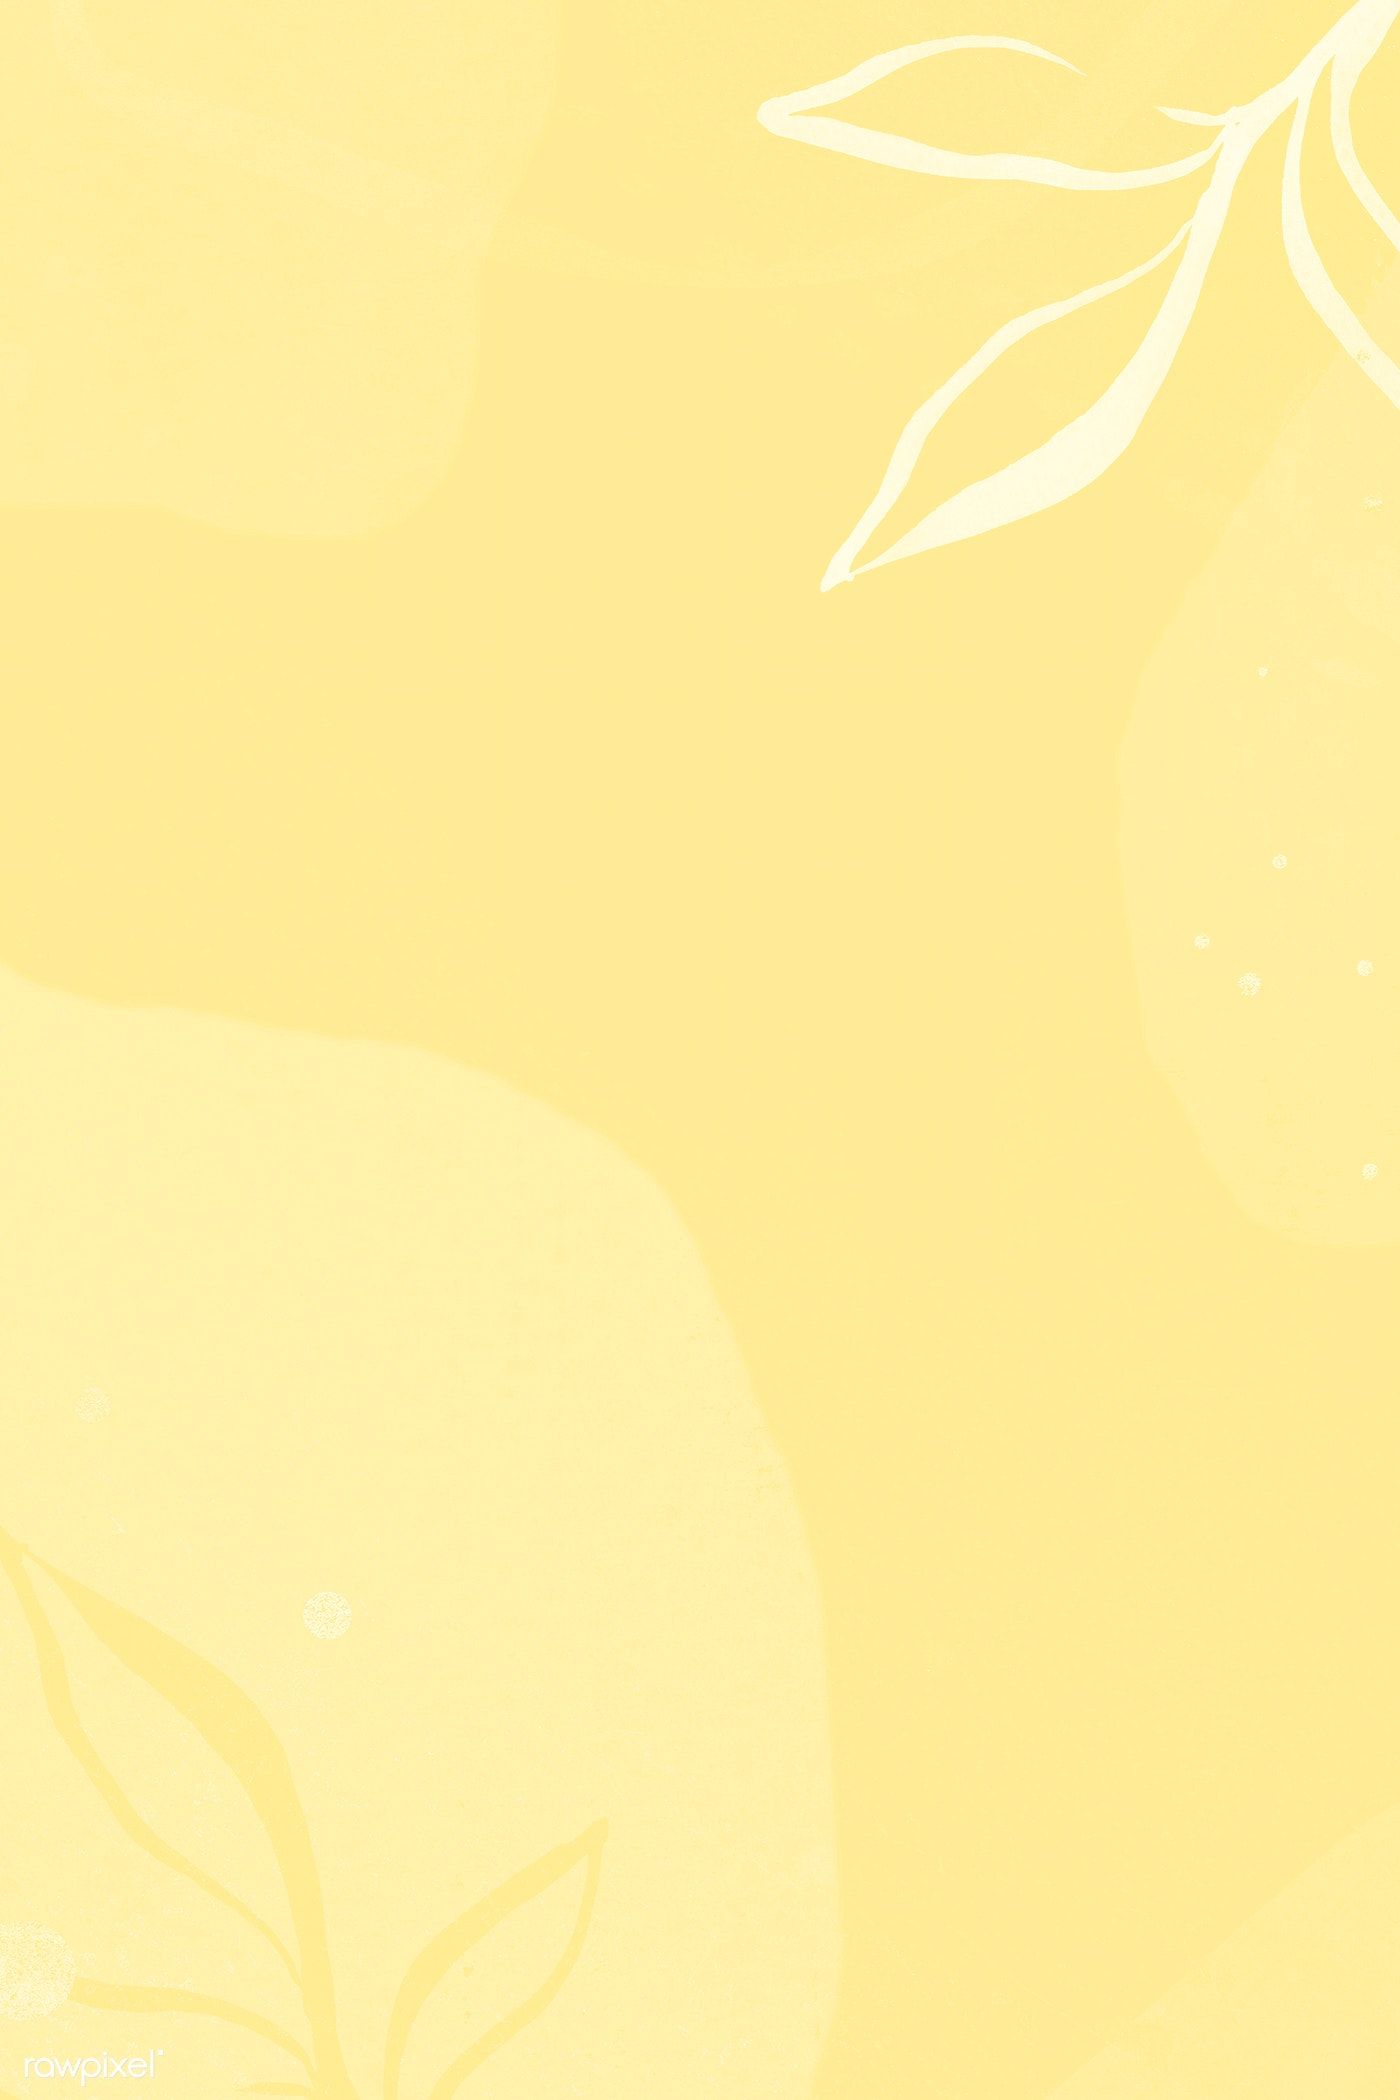 Download premium vector of Yellow background with a white leaf - Light yellow